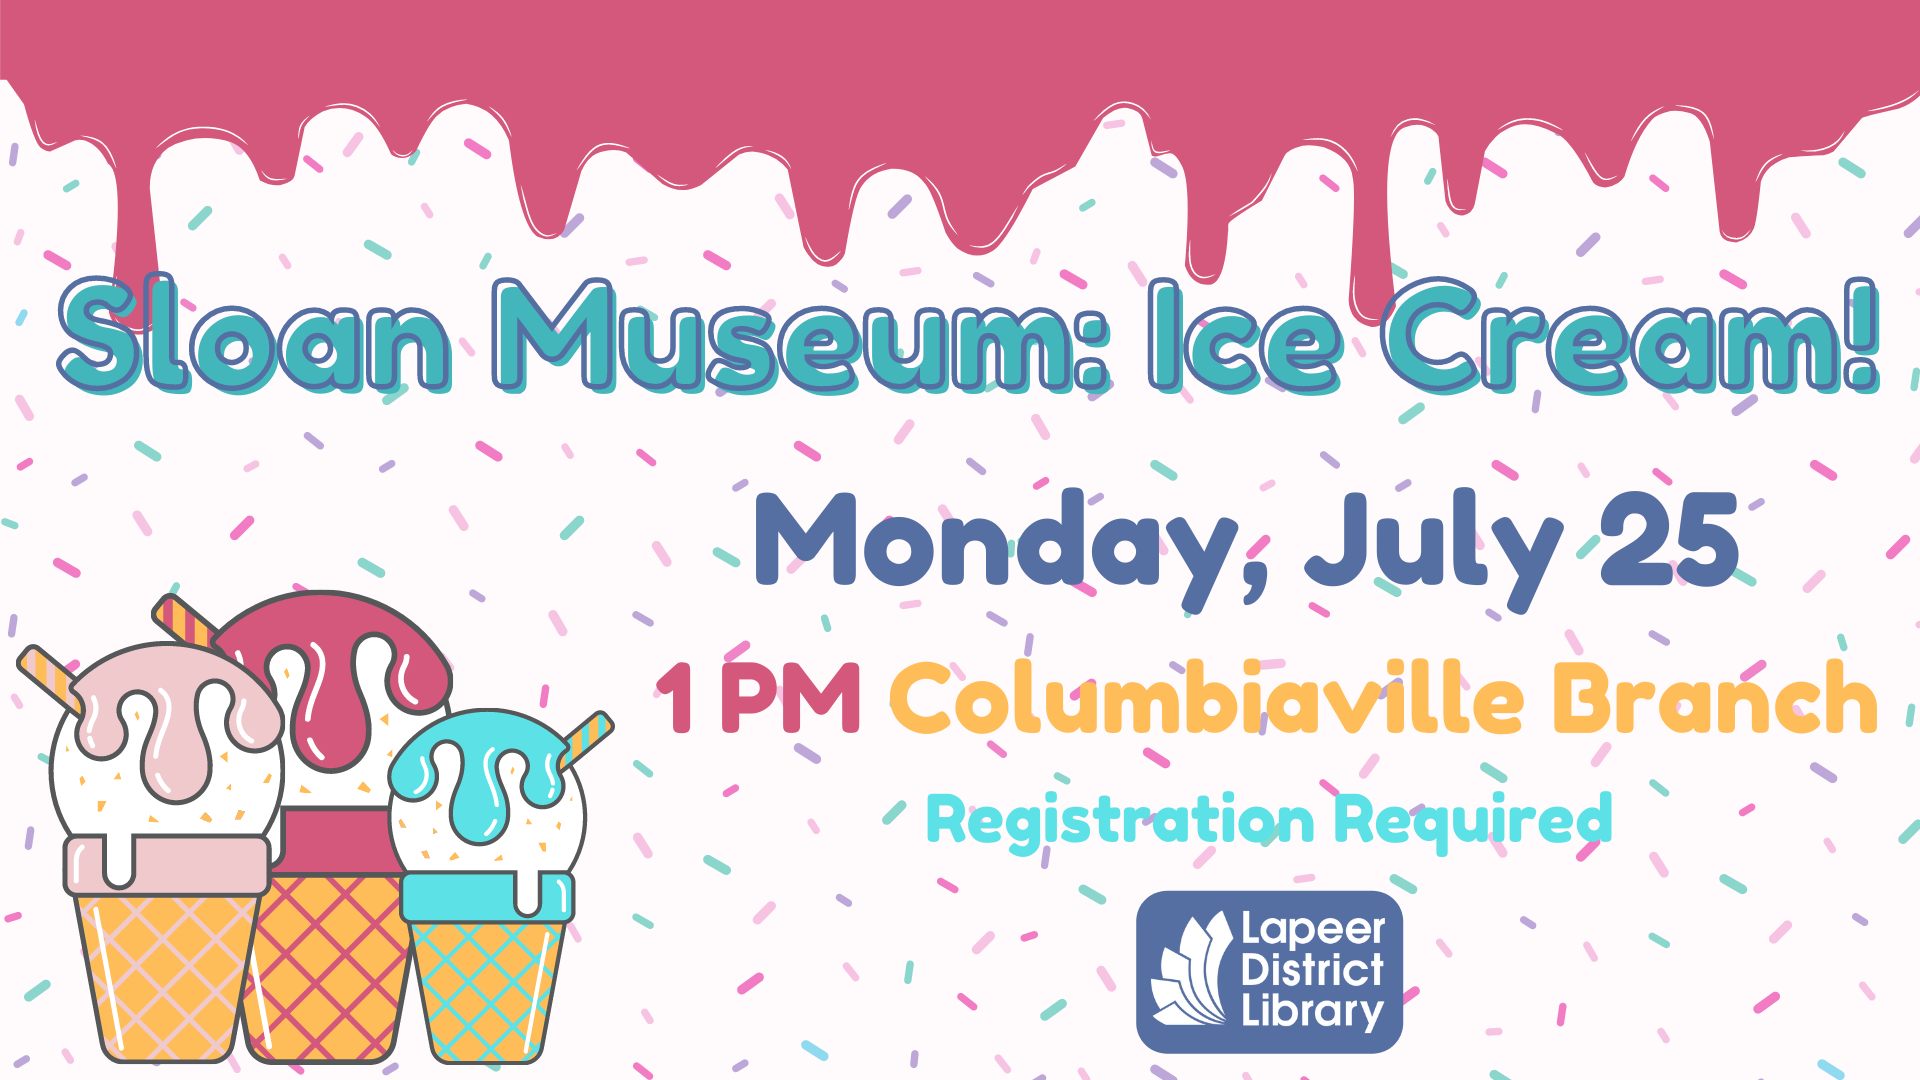 Sloan Museum Ice Cream Monday July 26 1 PM Columbiaville Branch Library registration required 